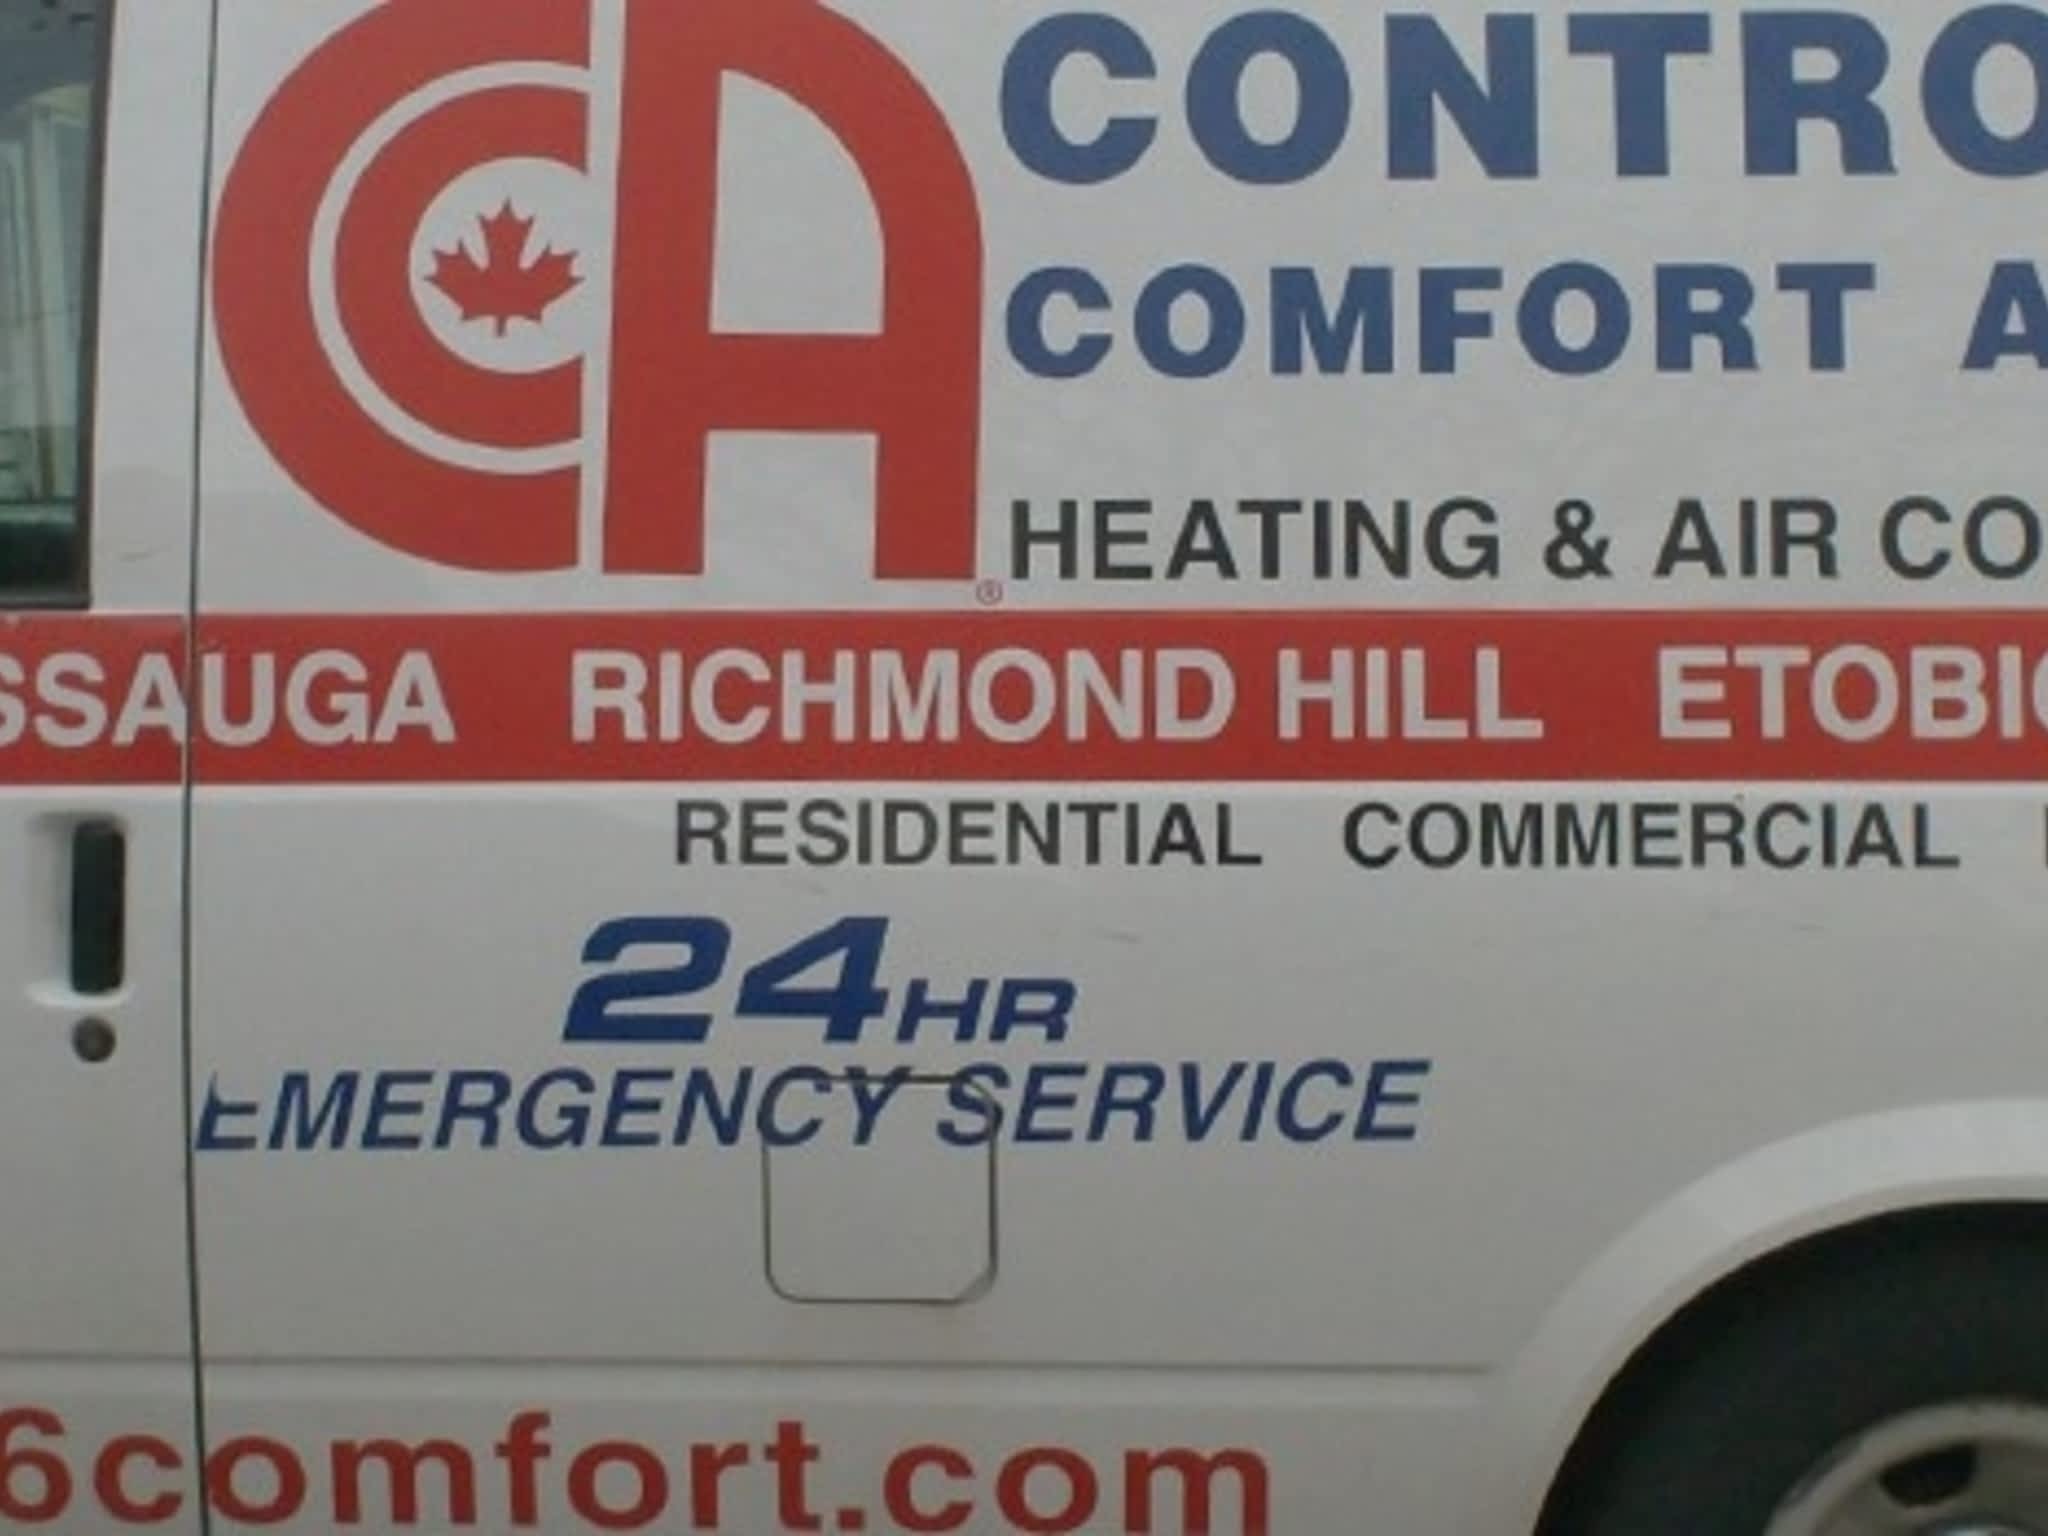 photo Controlled Comfort Air Heating & Air Conditioning